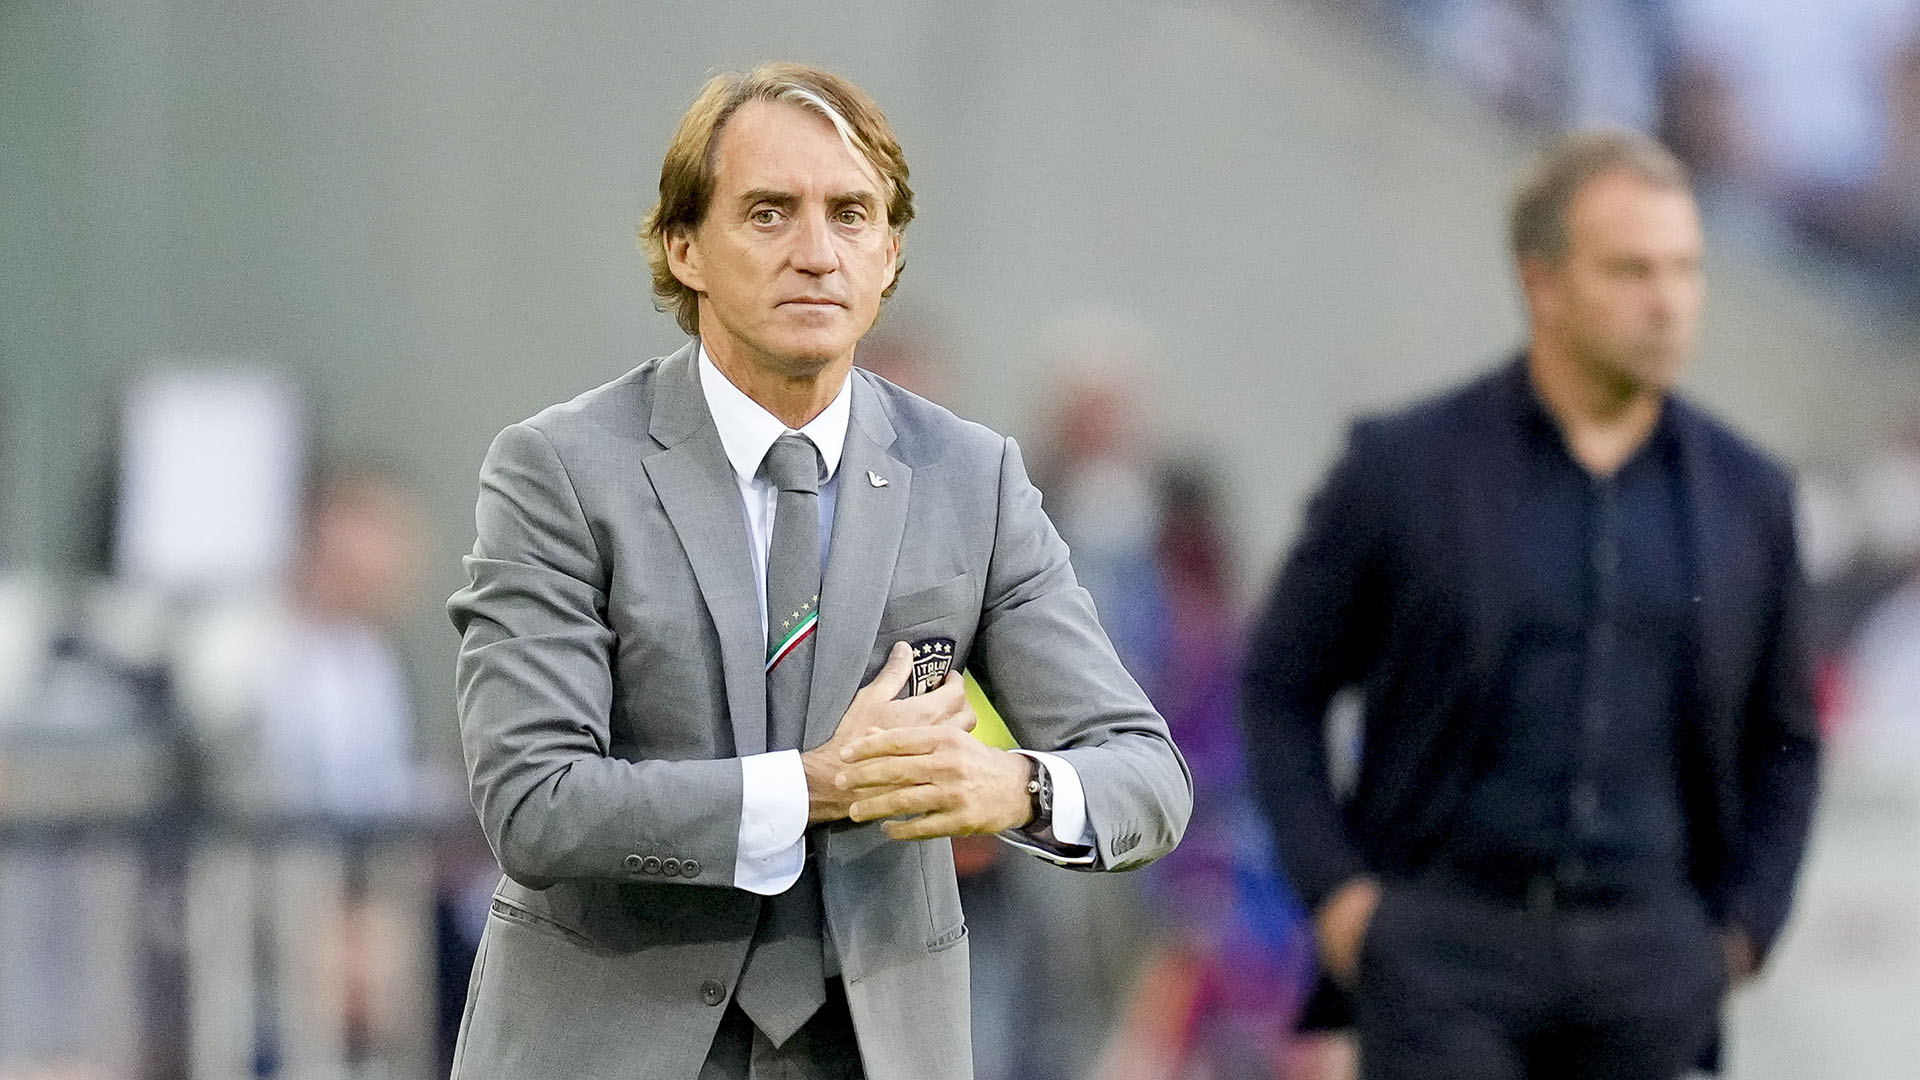 FIGC is closing in on the appointment of Luciano Spalletti, and more details have emerged about the abrupt separation with Roberto Mancini.